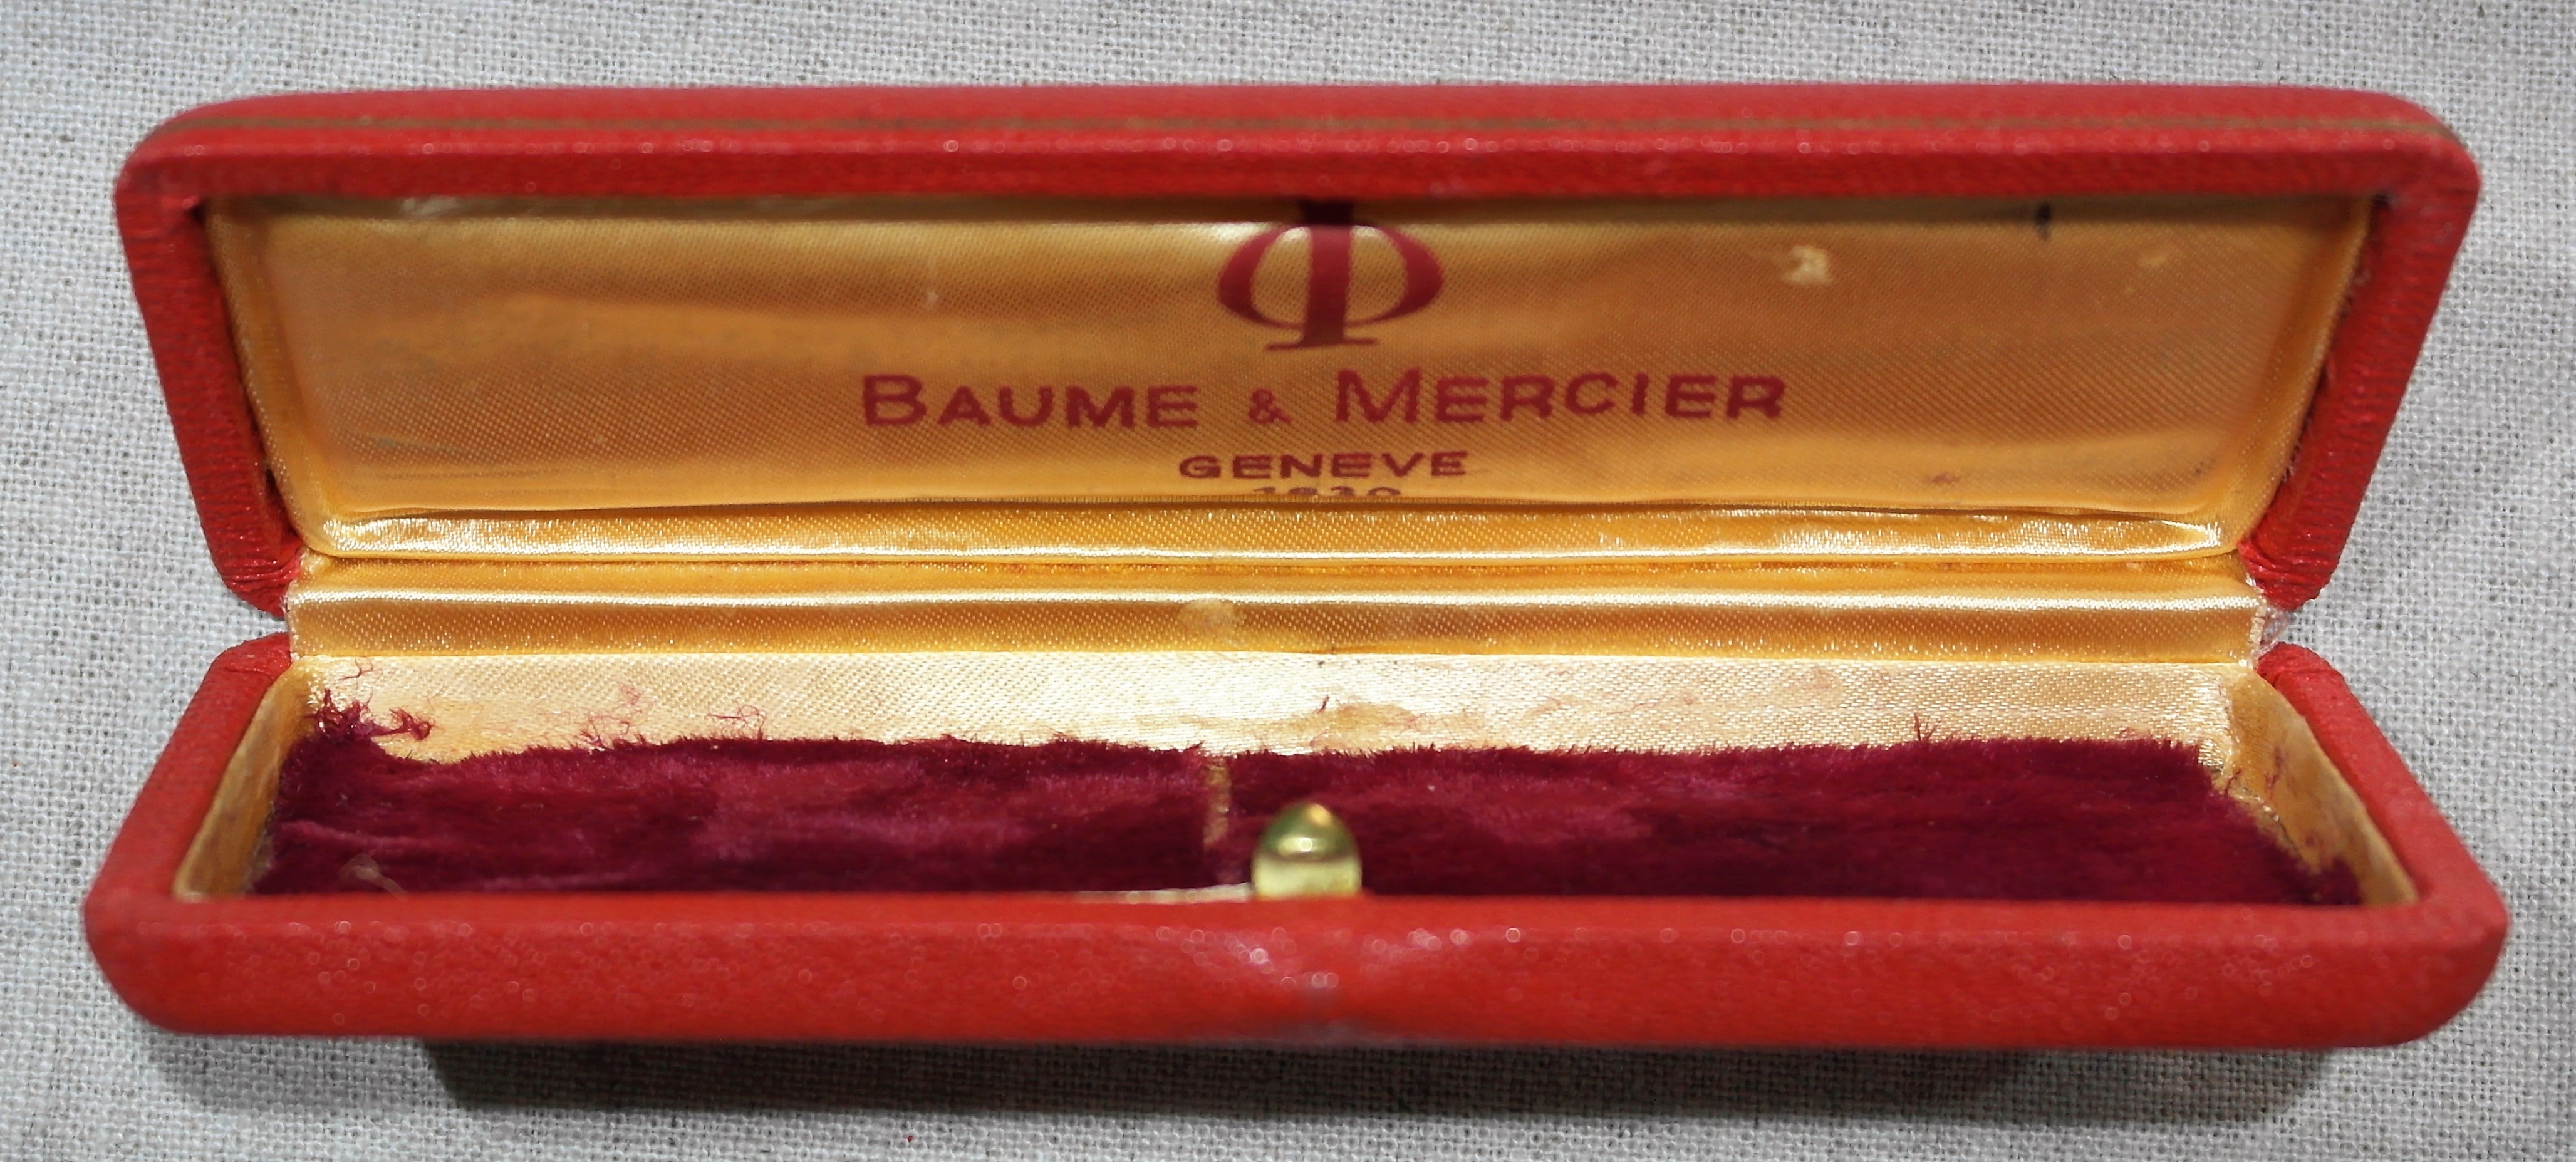 Baume & Mercier vintage plastic watch box red old logo for man's models good condition